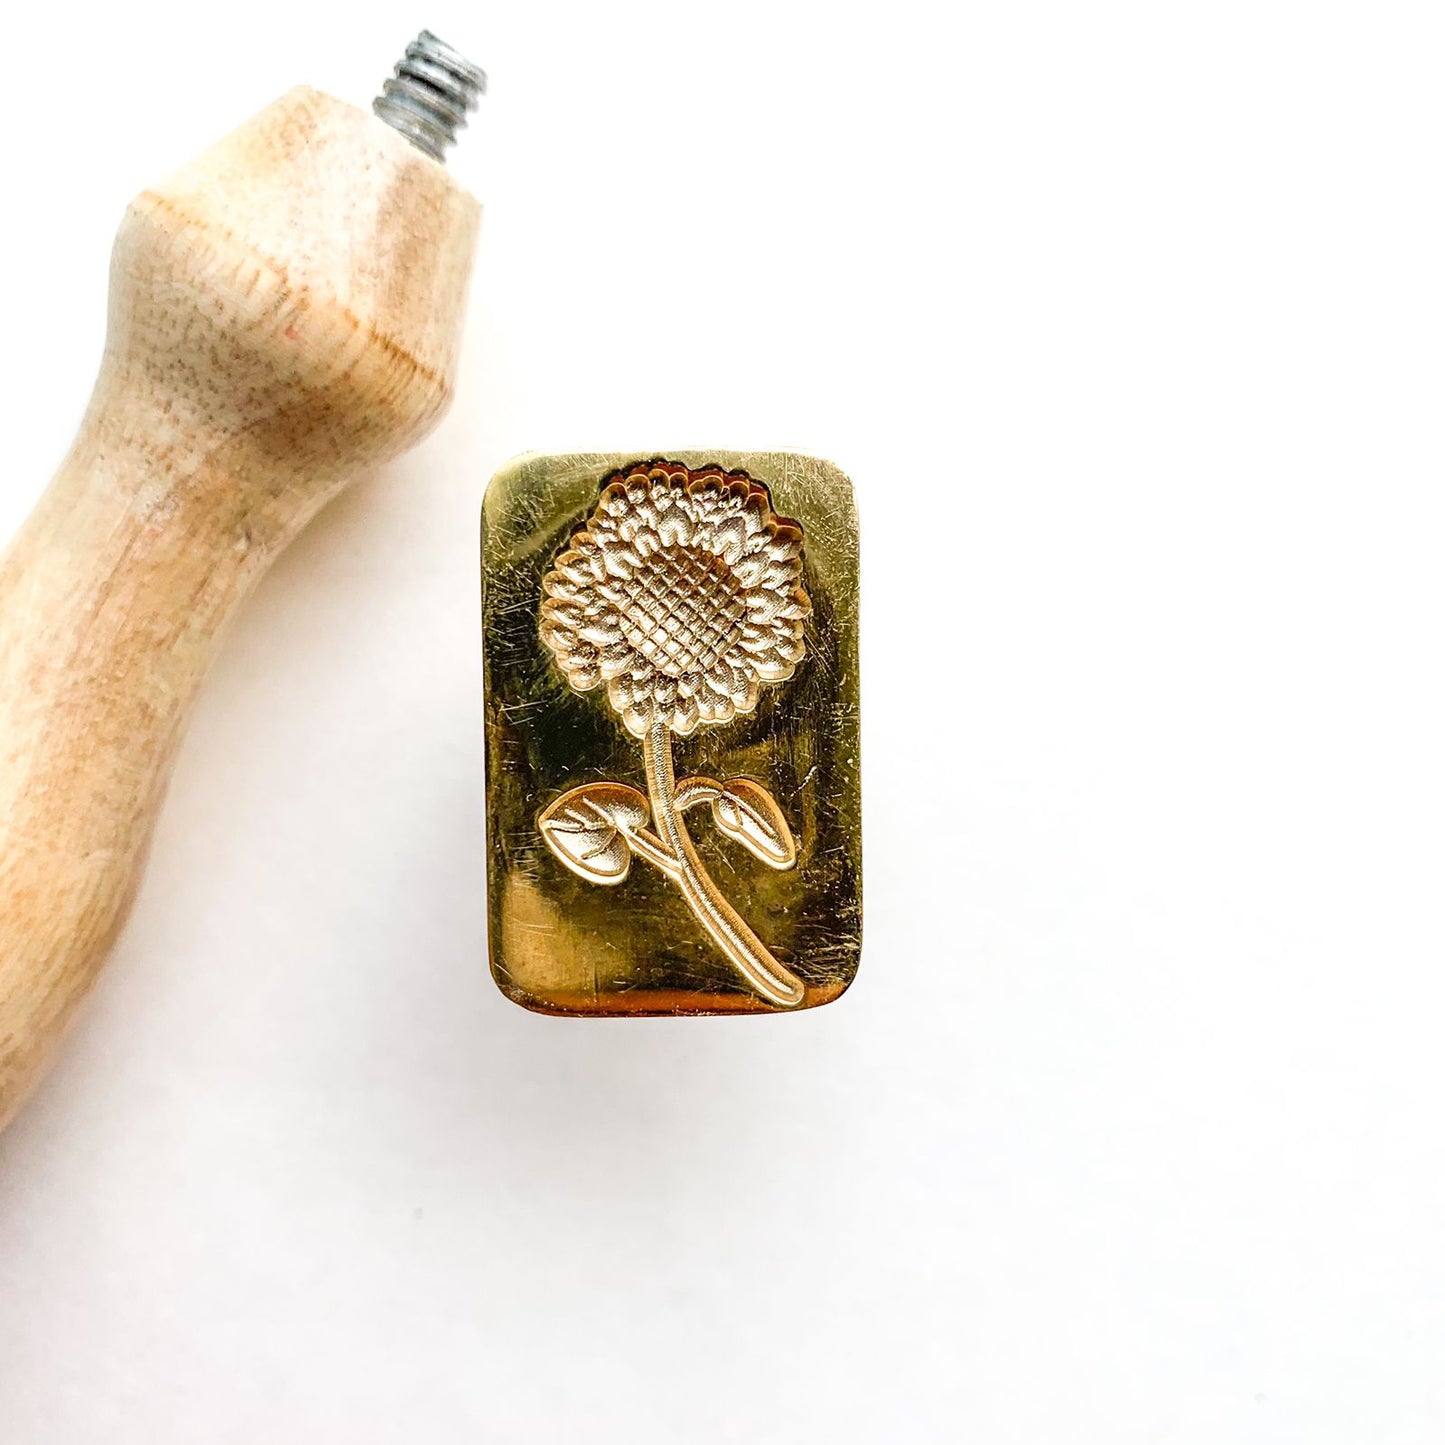 AW79 - 18B - Premium 3D Seal Wax Stamp with Wooden Handle | 30mm Diameter